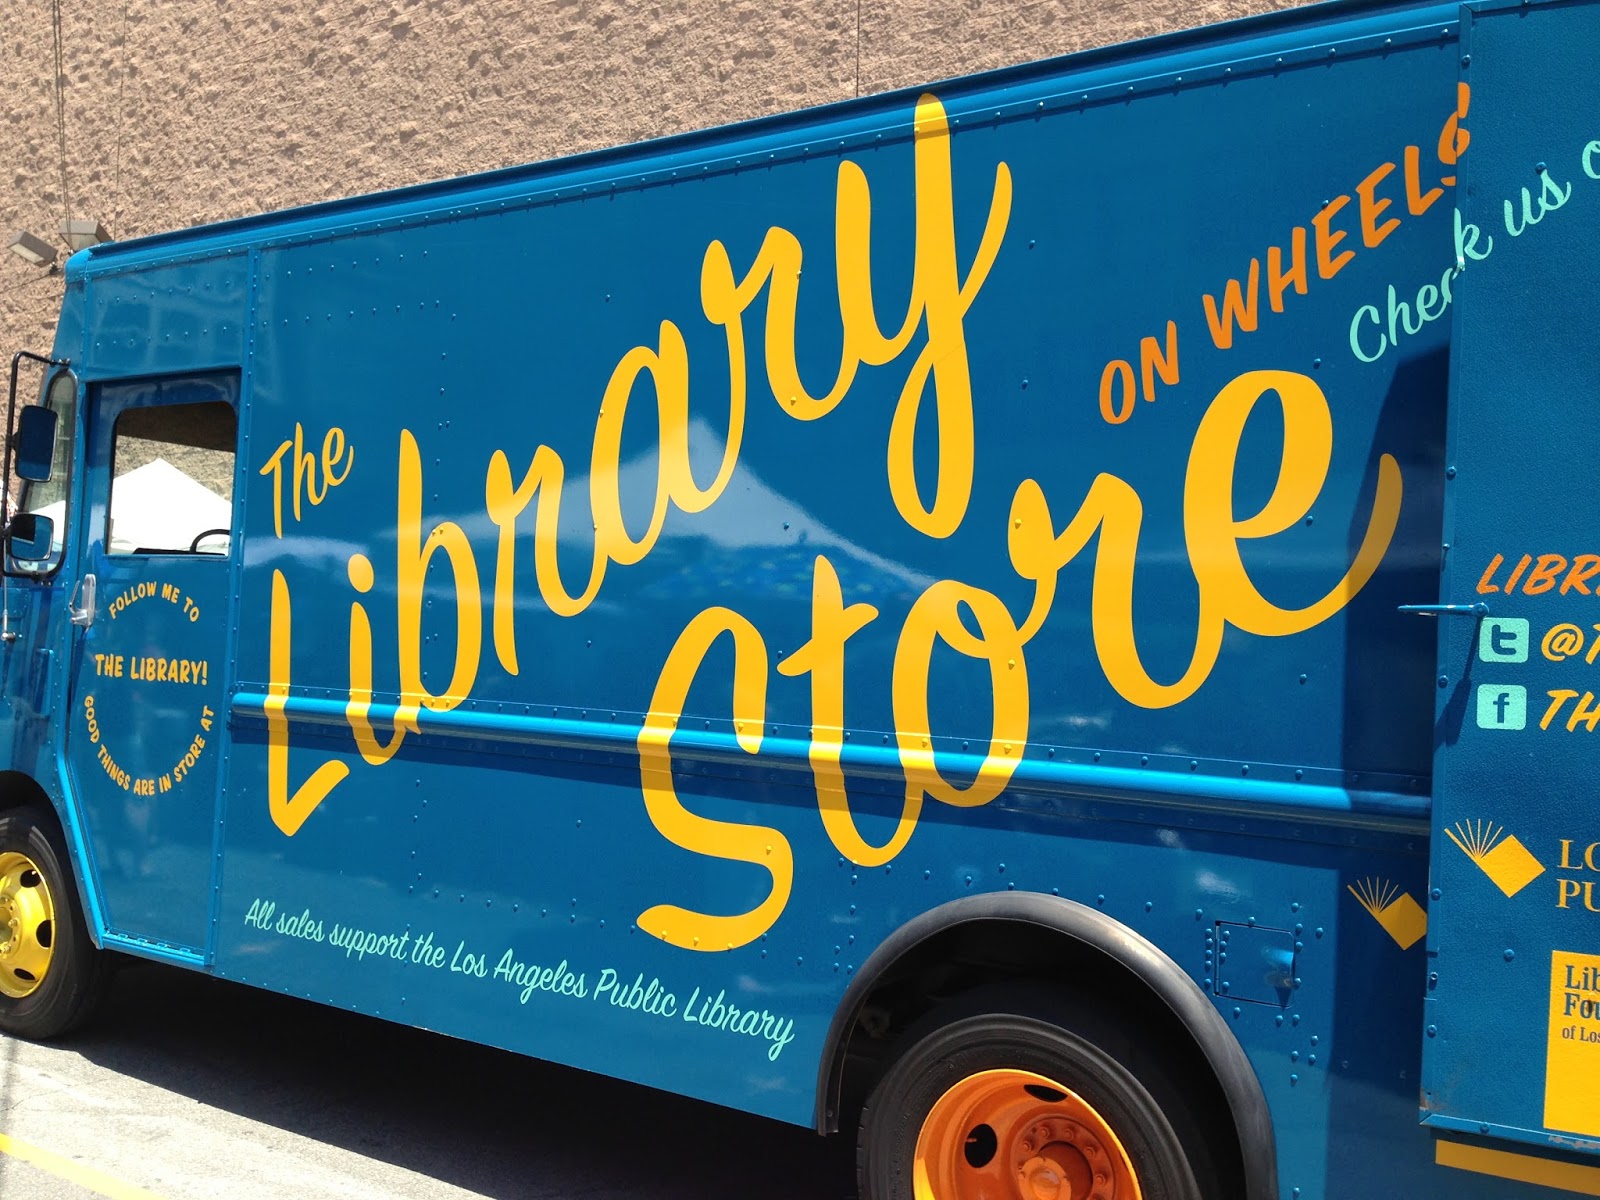 Shopping at The Library Store on Wheels - LA Explorer